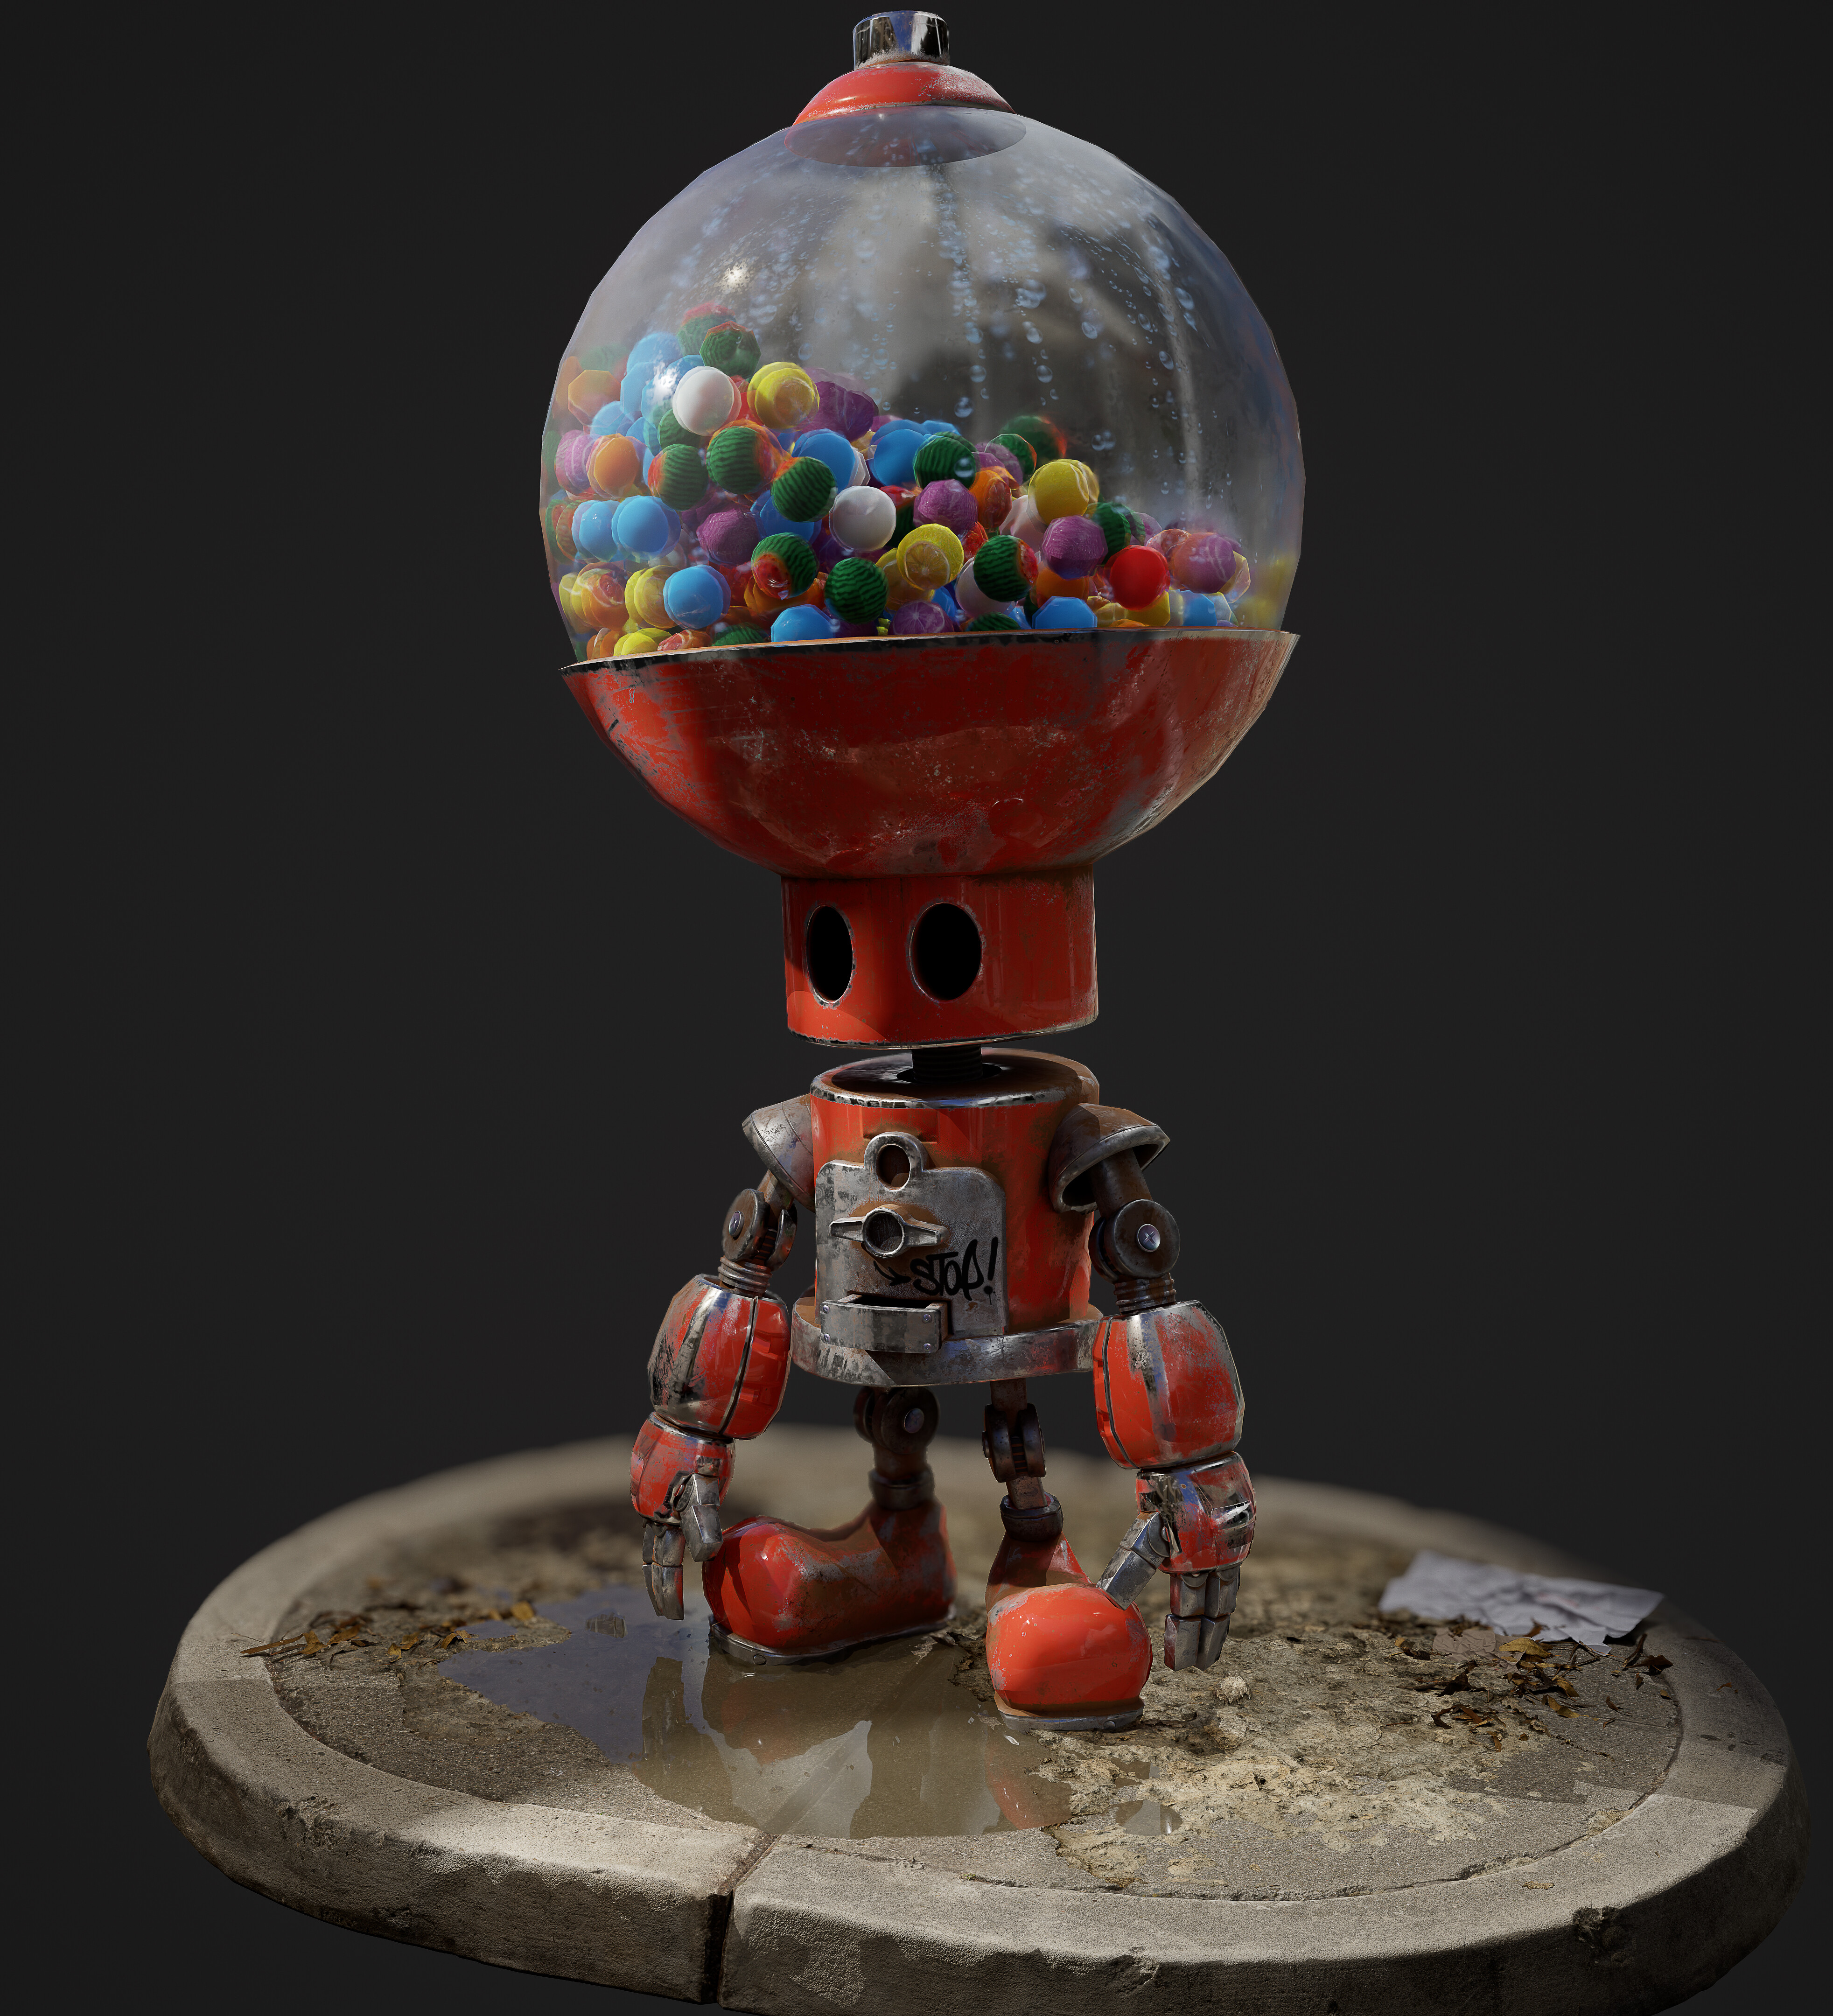 Stupidly Sweet! Candy Factory (Stupidia) - Animations - Blender Artists  Community